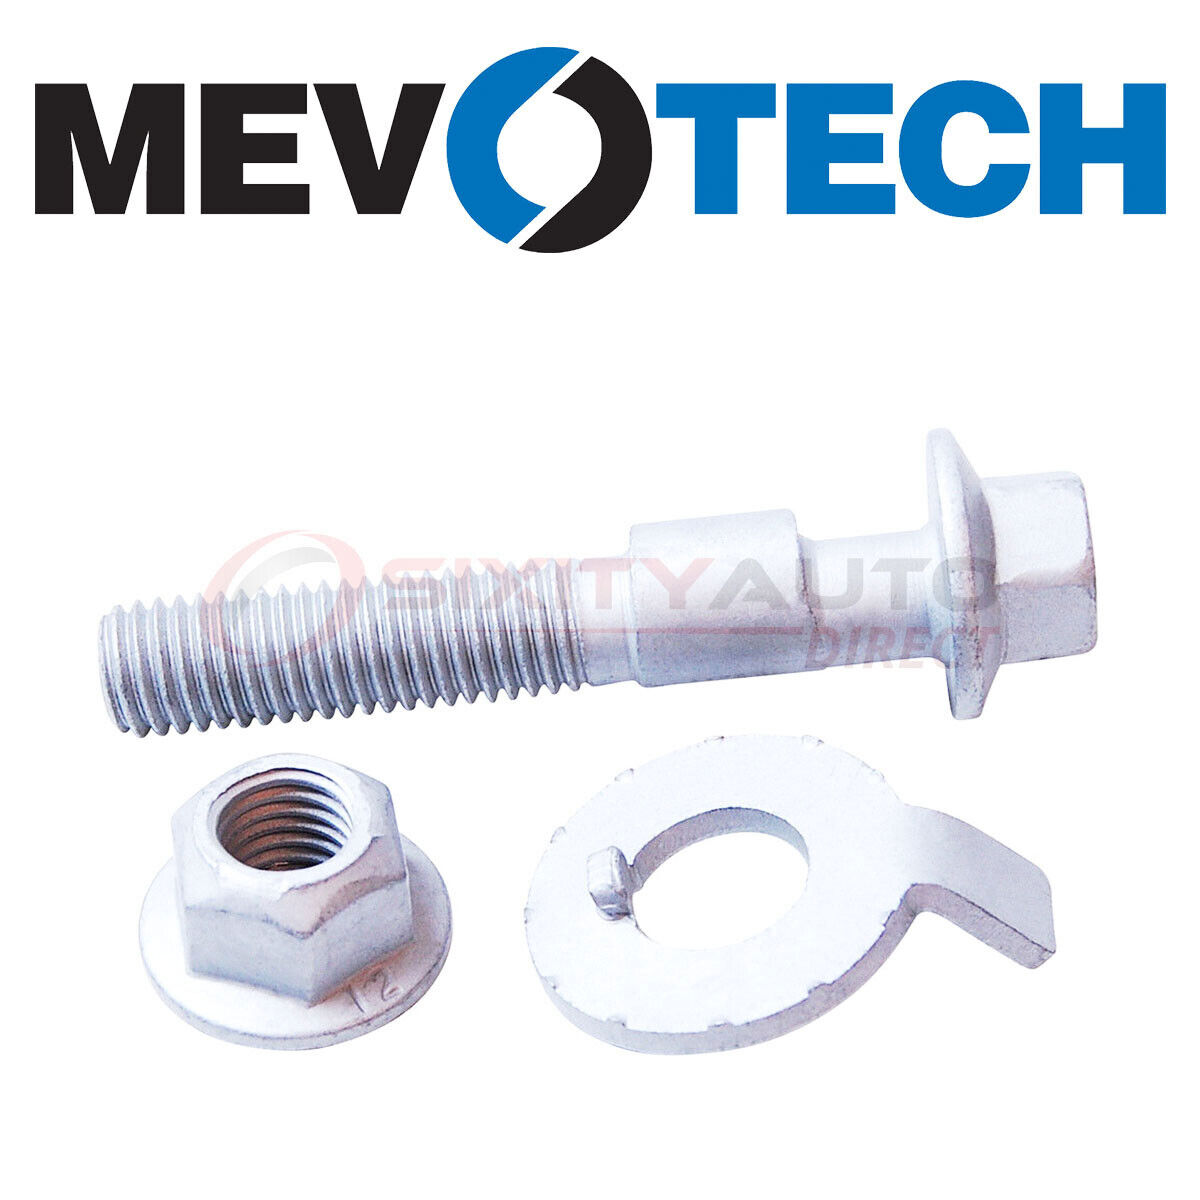 Mevotech Alignment Camber Kit for 1986 Nissan Stanza 2.0L L4 - Wheels Tires yr